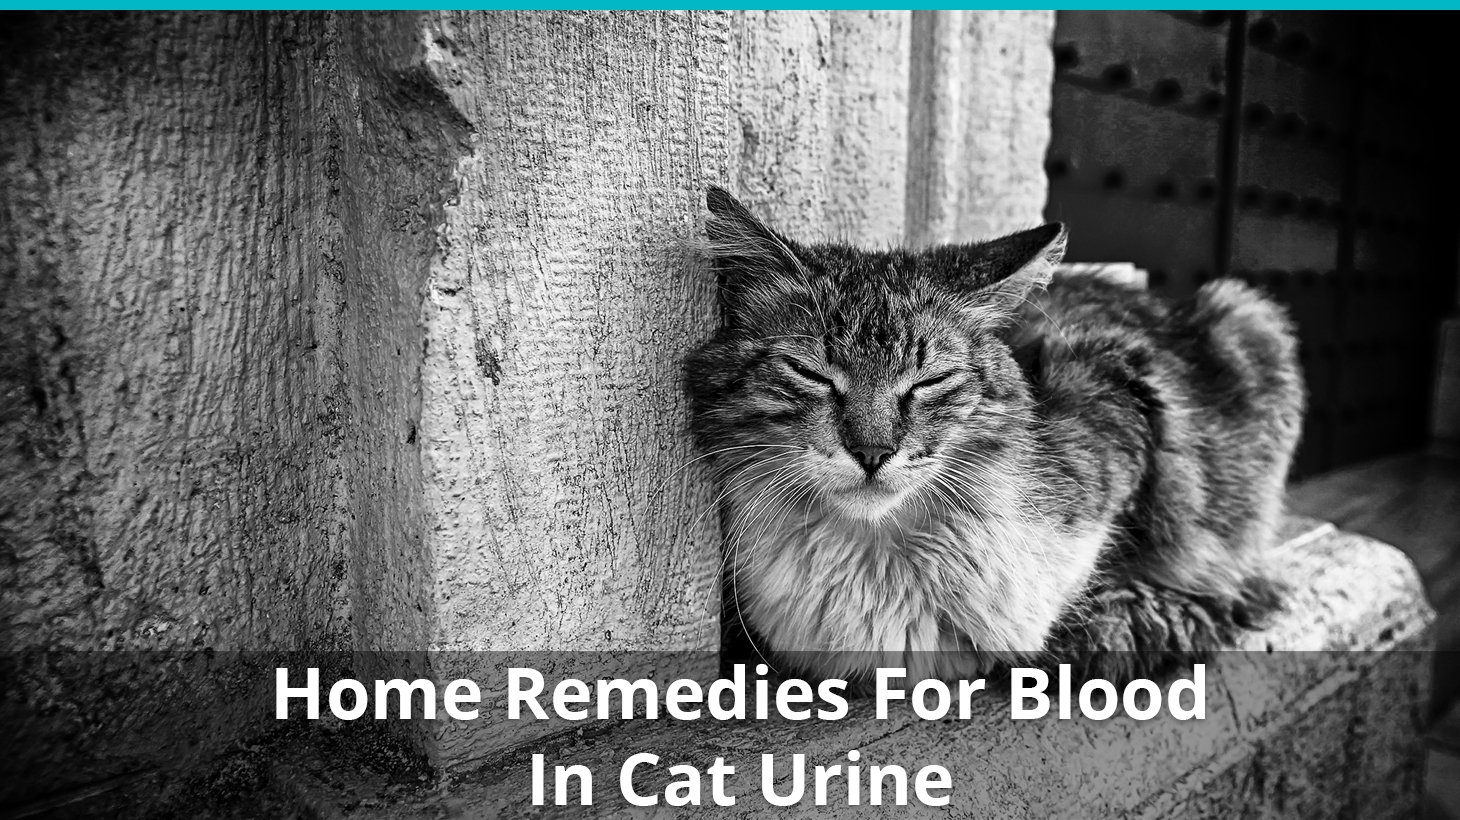 Home Remedies For When There's Blood In Your Cat's Urine